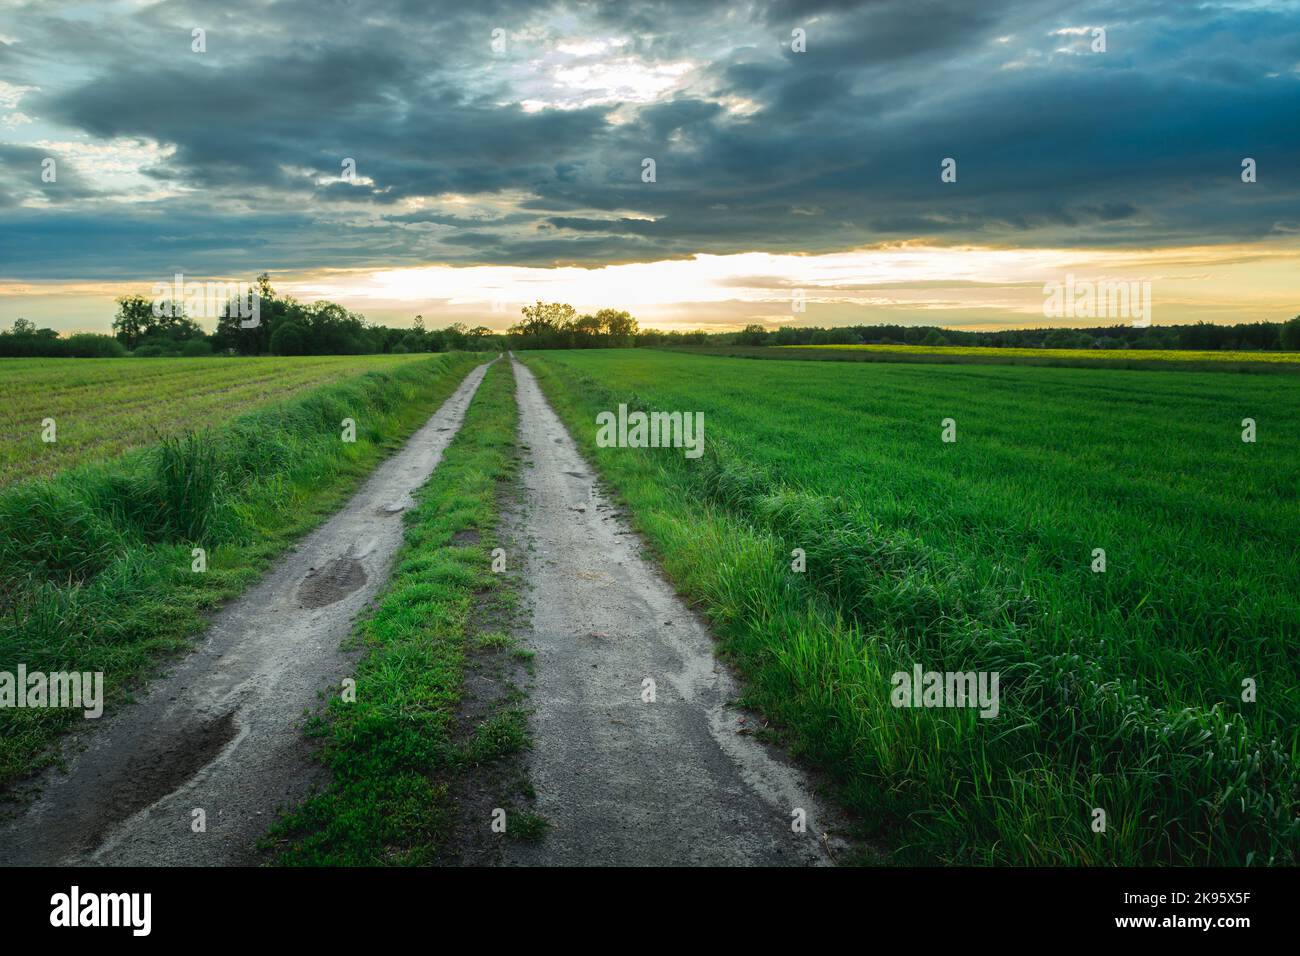 Long dirt road through fields and evening clouds on the sky Stock Photo